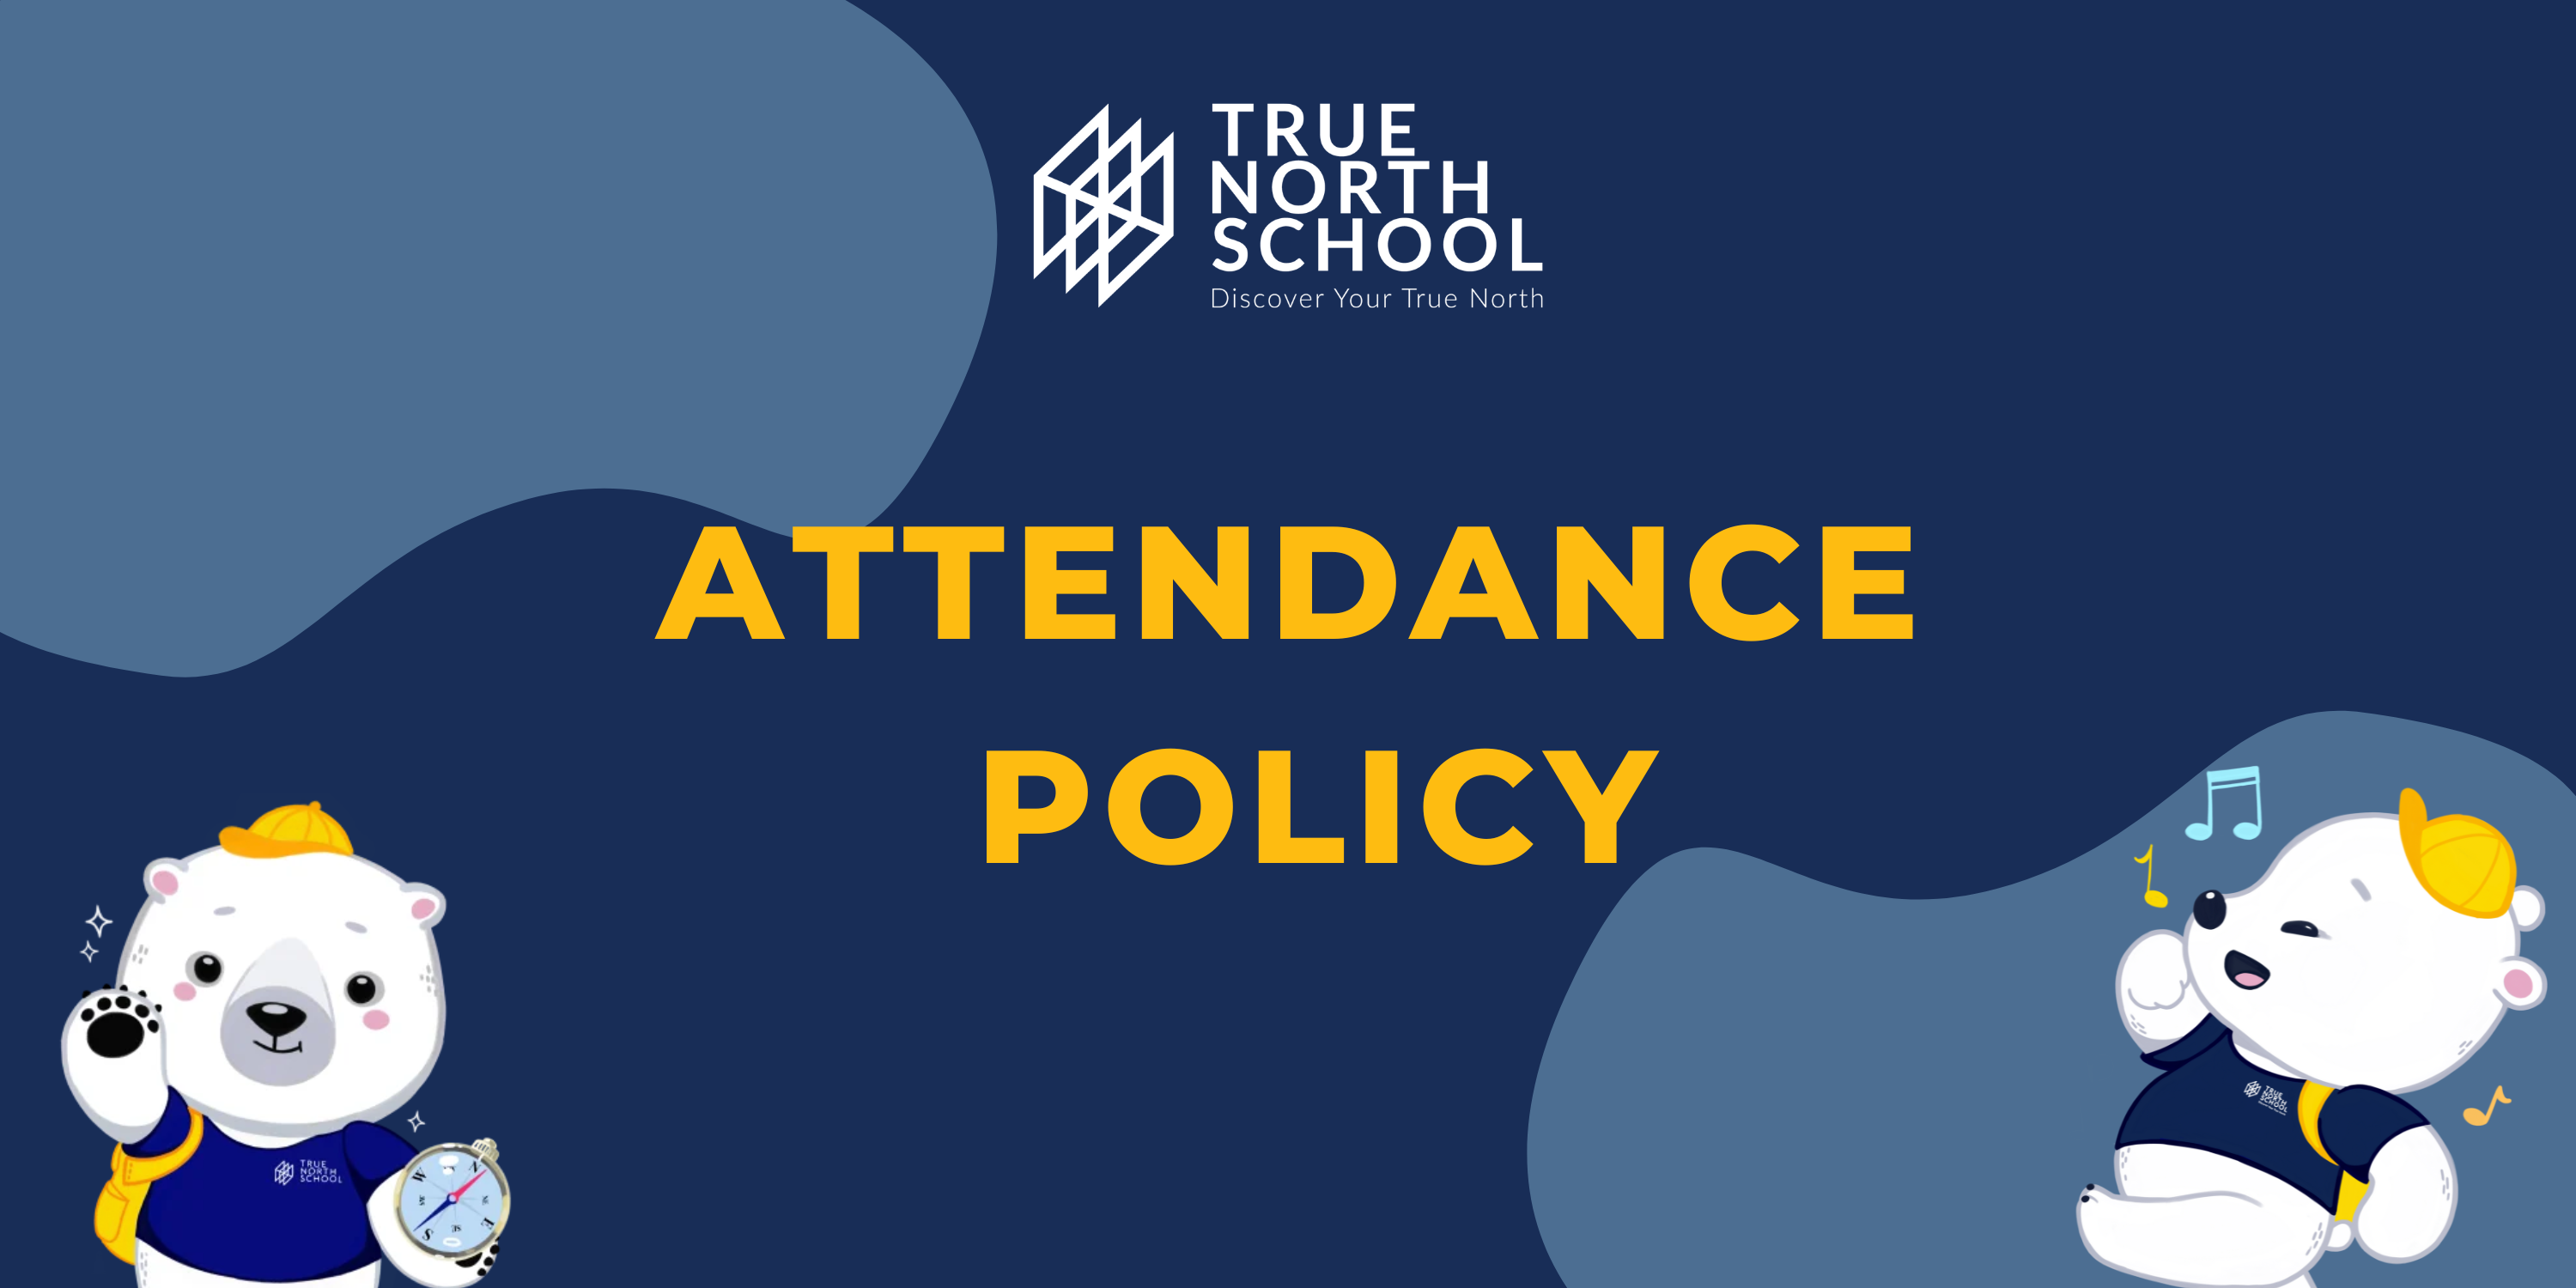 Attendance Policy Under Review